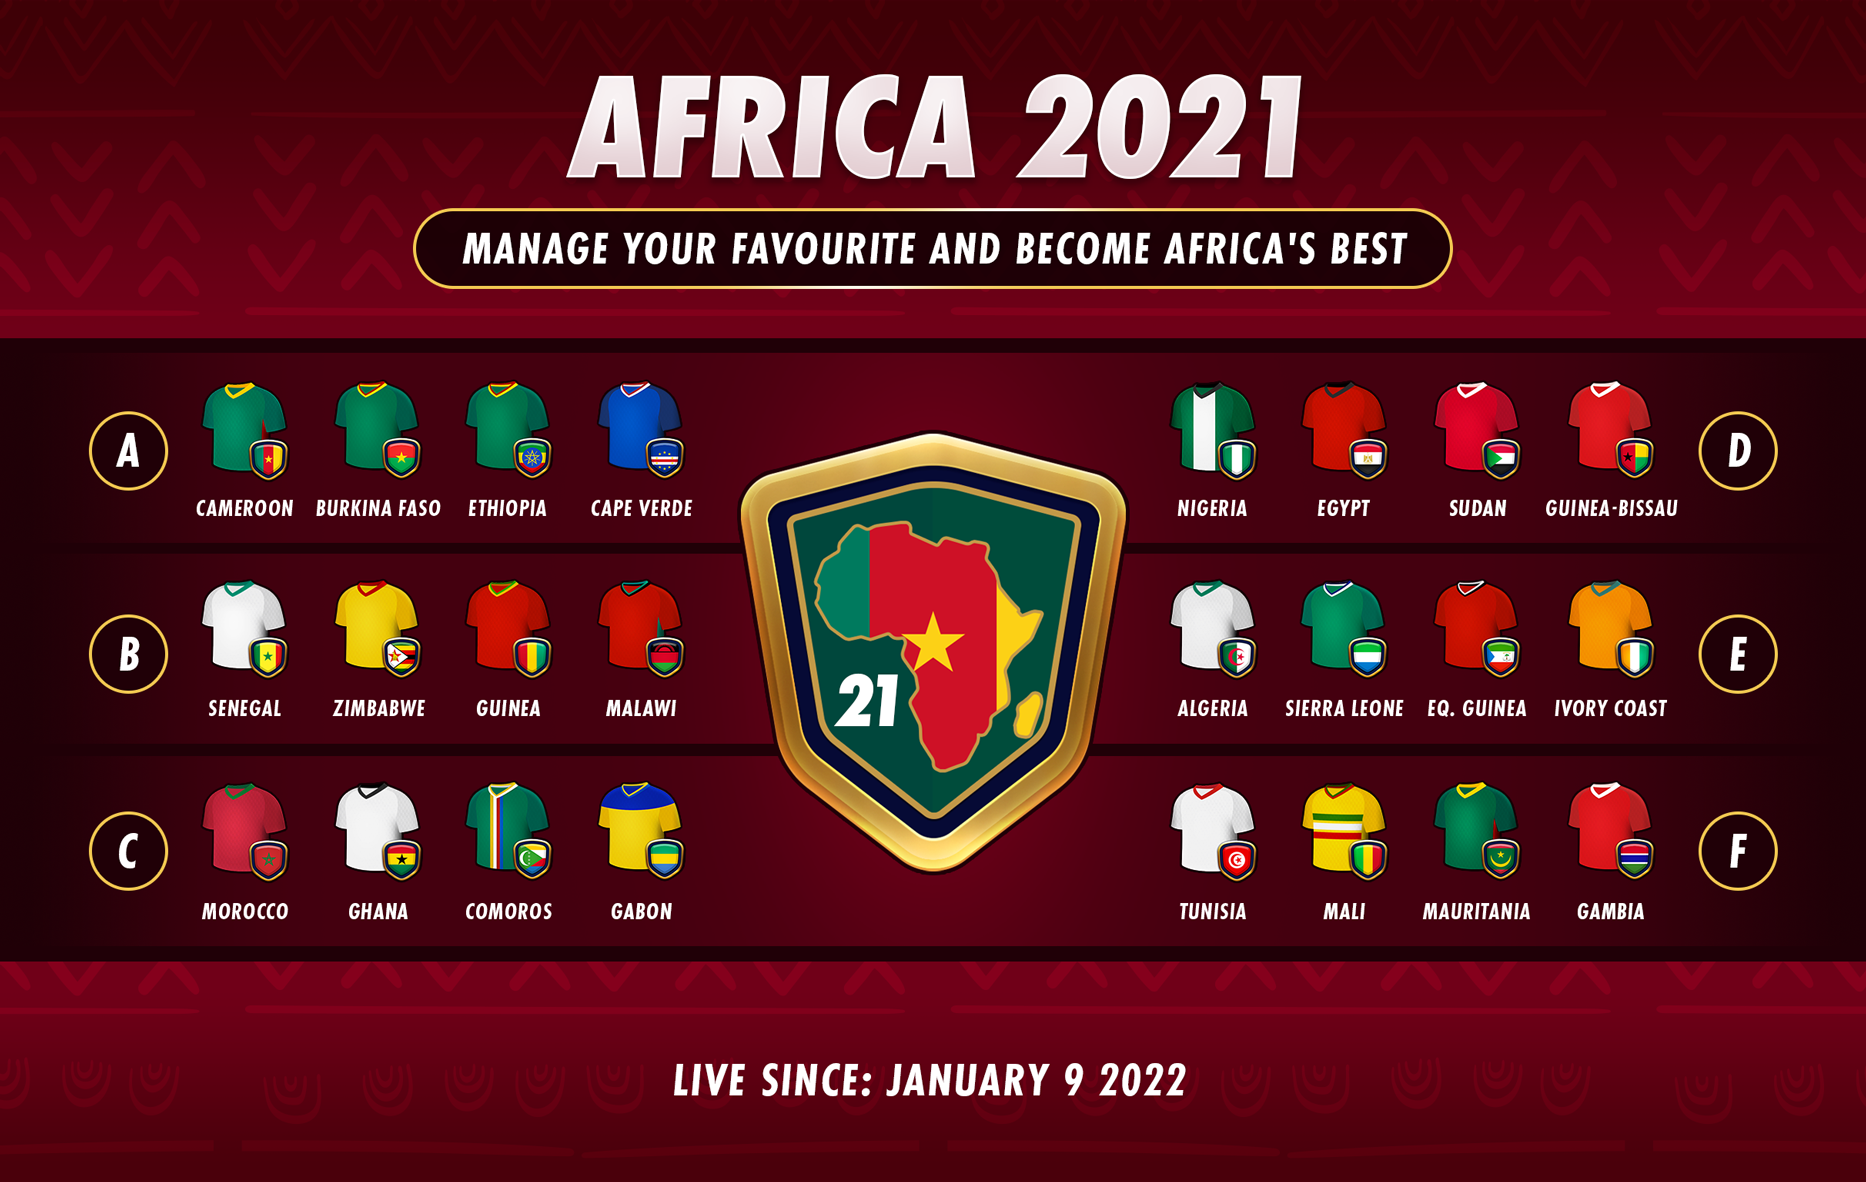 f-Africa-2021.png